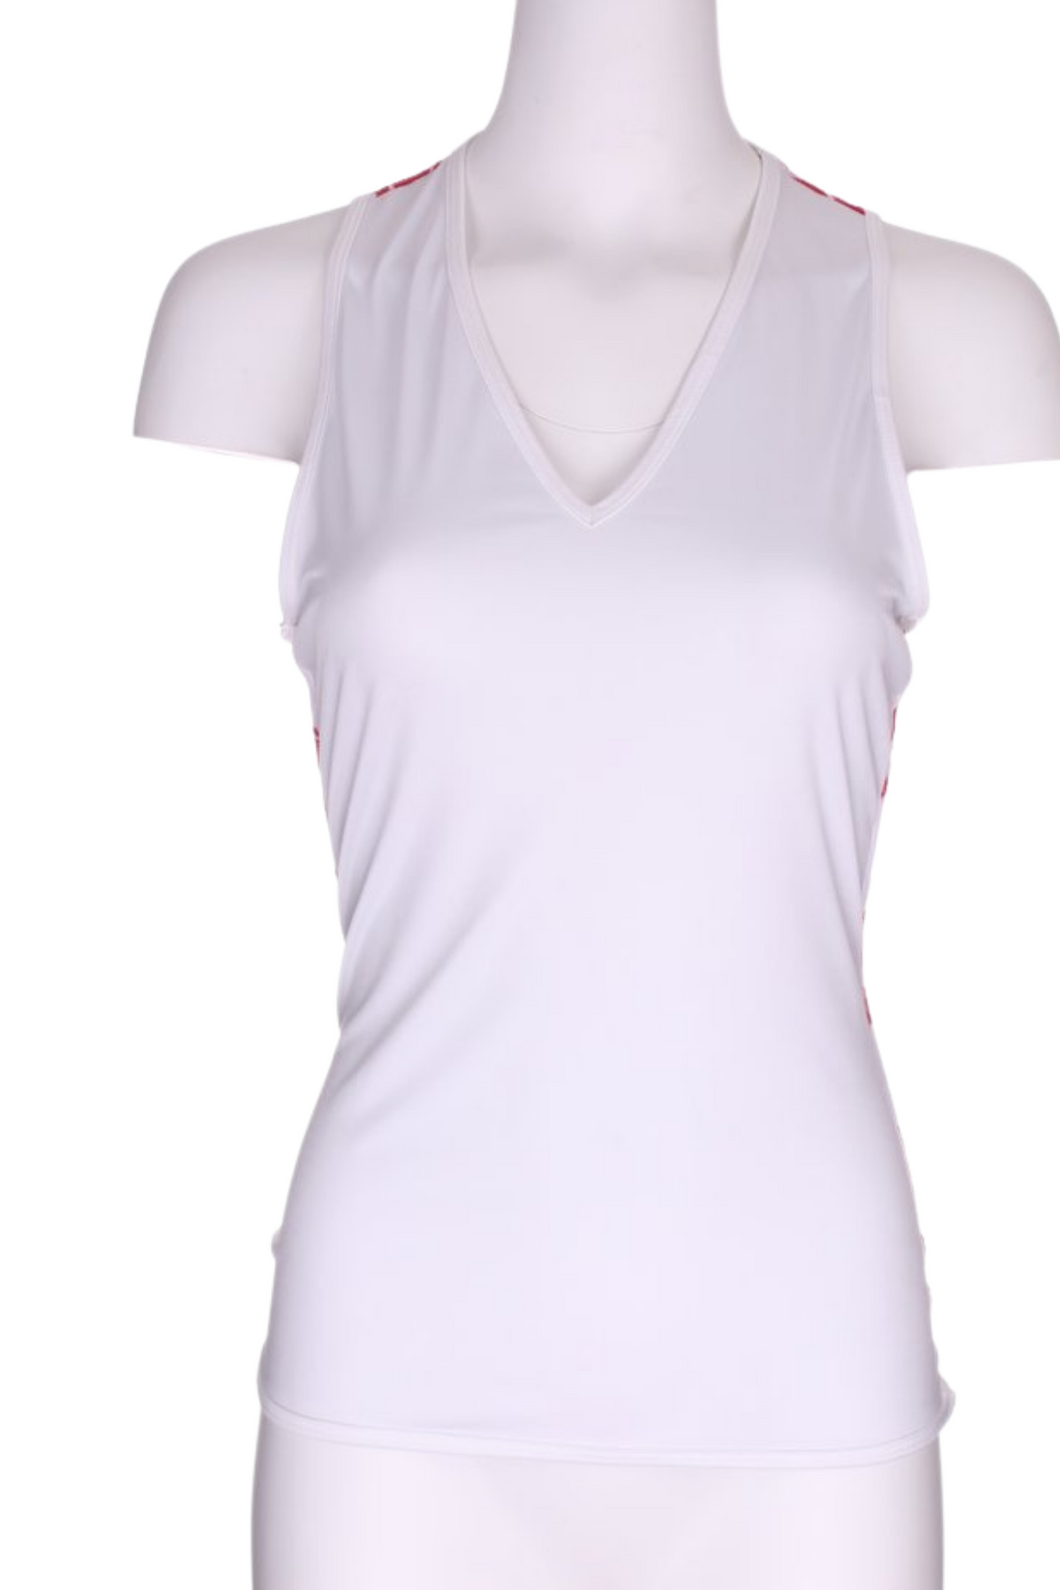 White Vee Tank with Mid Heart Mesh on Back - I LOVE MY DOUBLES PARTNER!!!